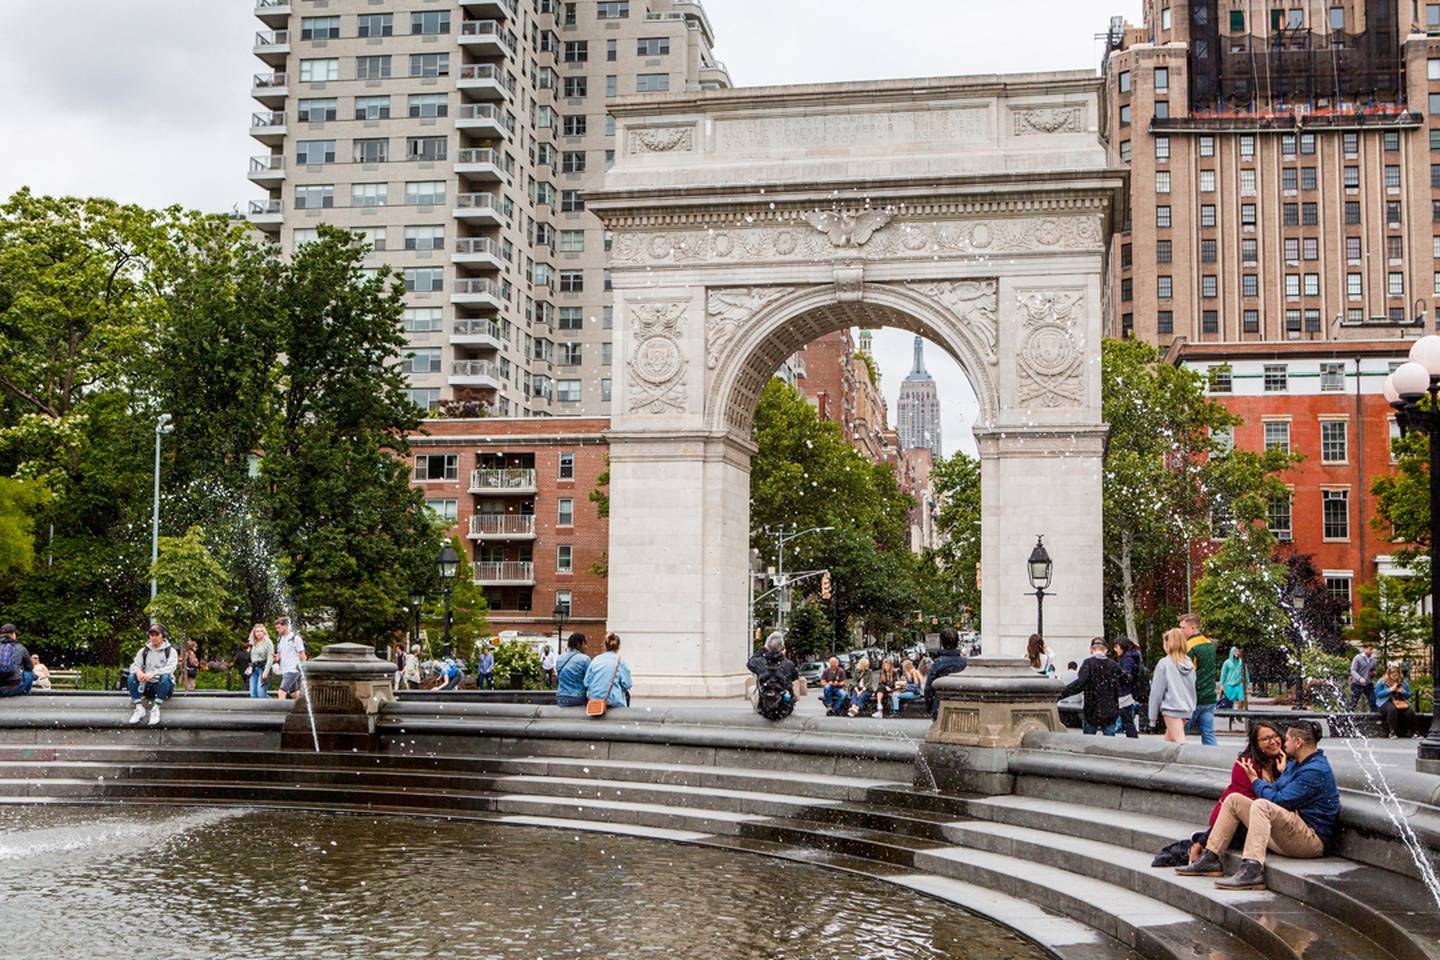 Greenwich Village offers jazz, comedy, pizza and more. Photo: Brittany Petronella/NYC & Company